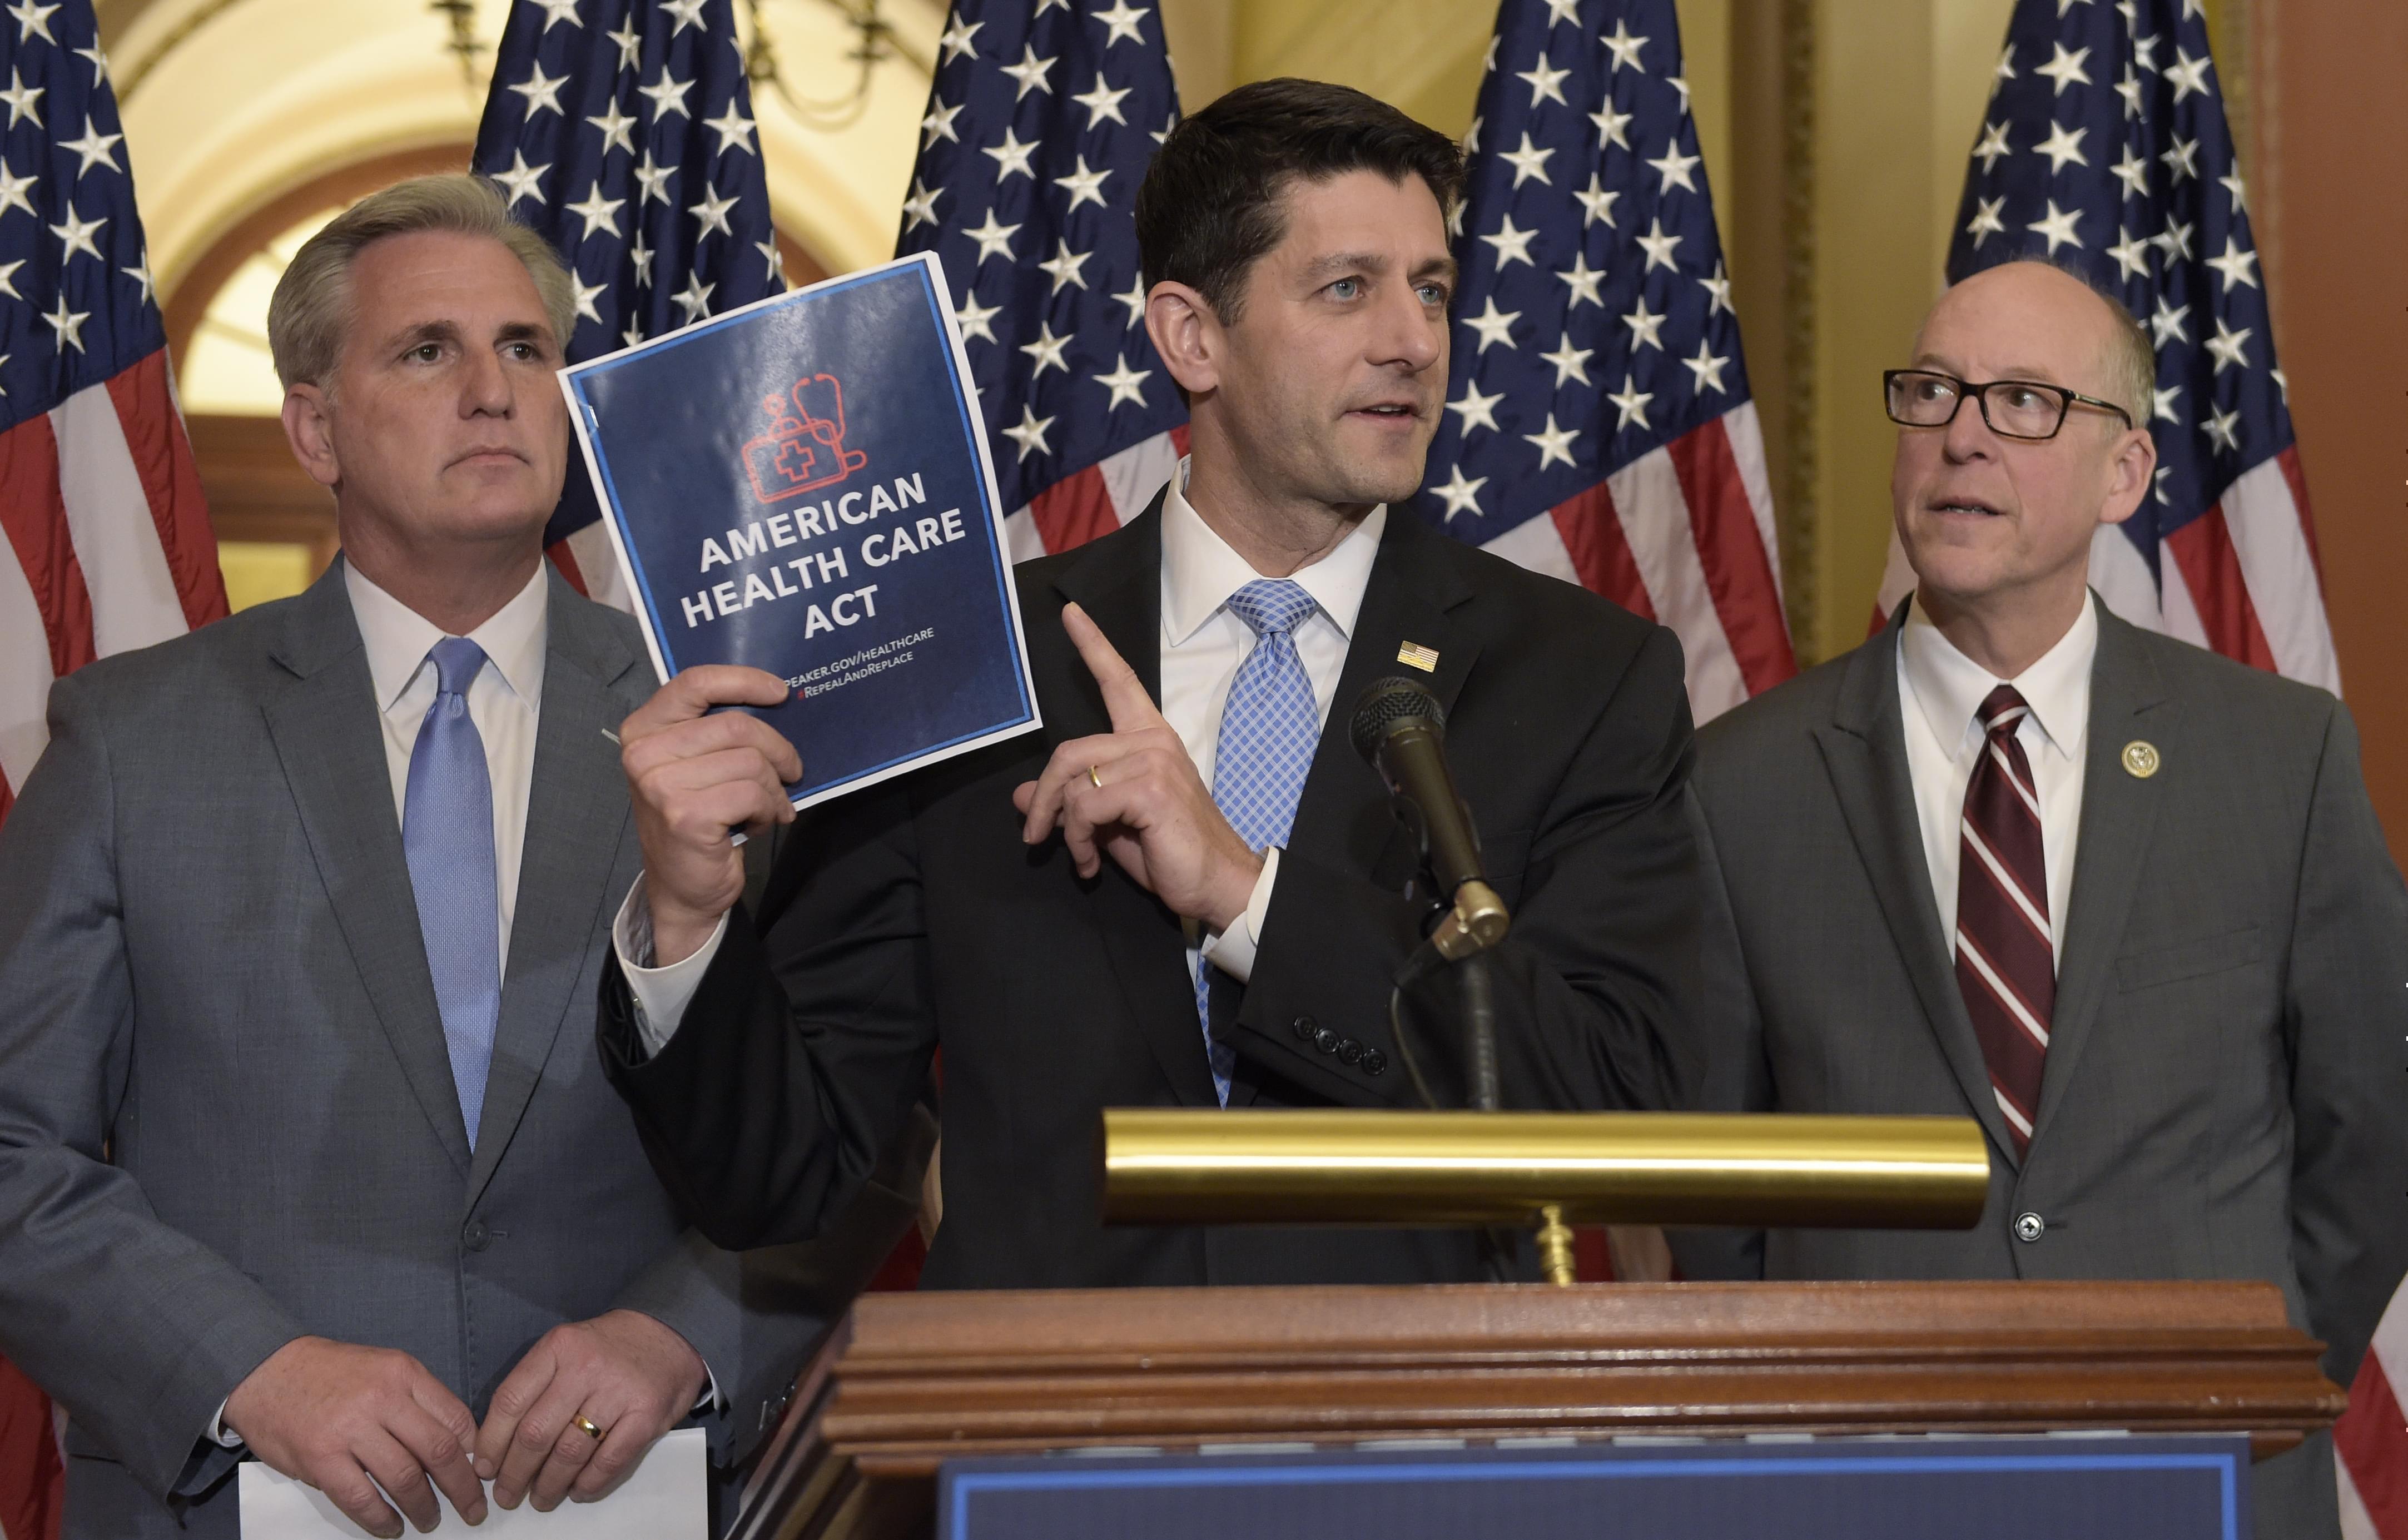 House Speaker Paul Ryan of Wis., center, standing with Energy and Commerce Committee Chairman Greg Walden, R-Ore., right, and House Majority Whip Kevin McCarthy, R-Calif., left, speaks during a news conference on the American Health Care Act on Capit